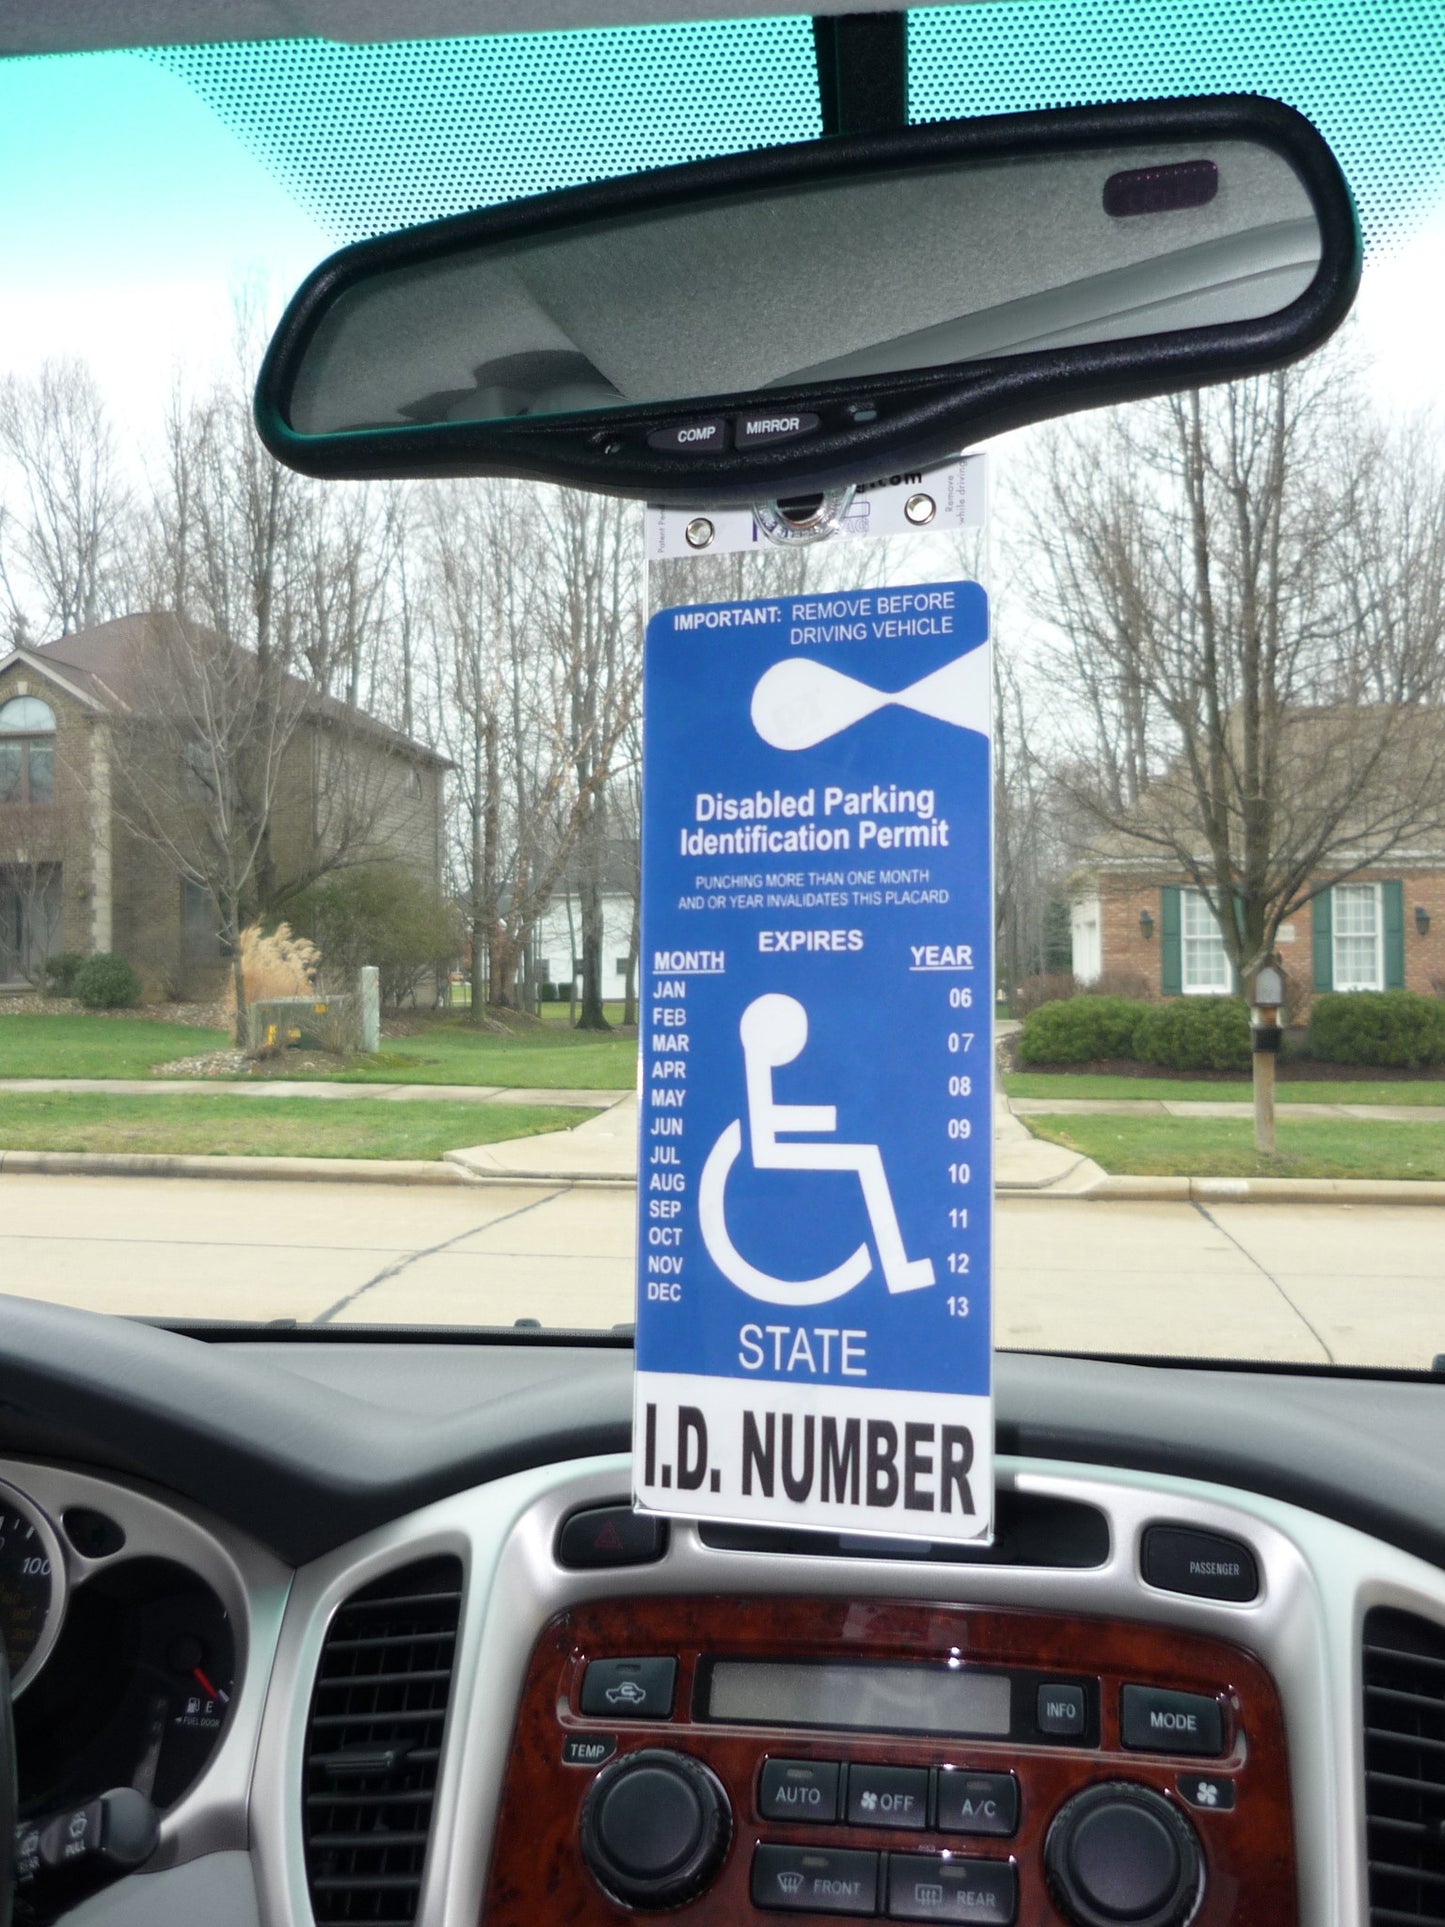 rear view mirror mounted handicap parking placard holder and protector. Fits disability tags 9.25 in x 3.5 in or wider